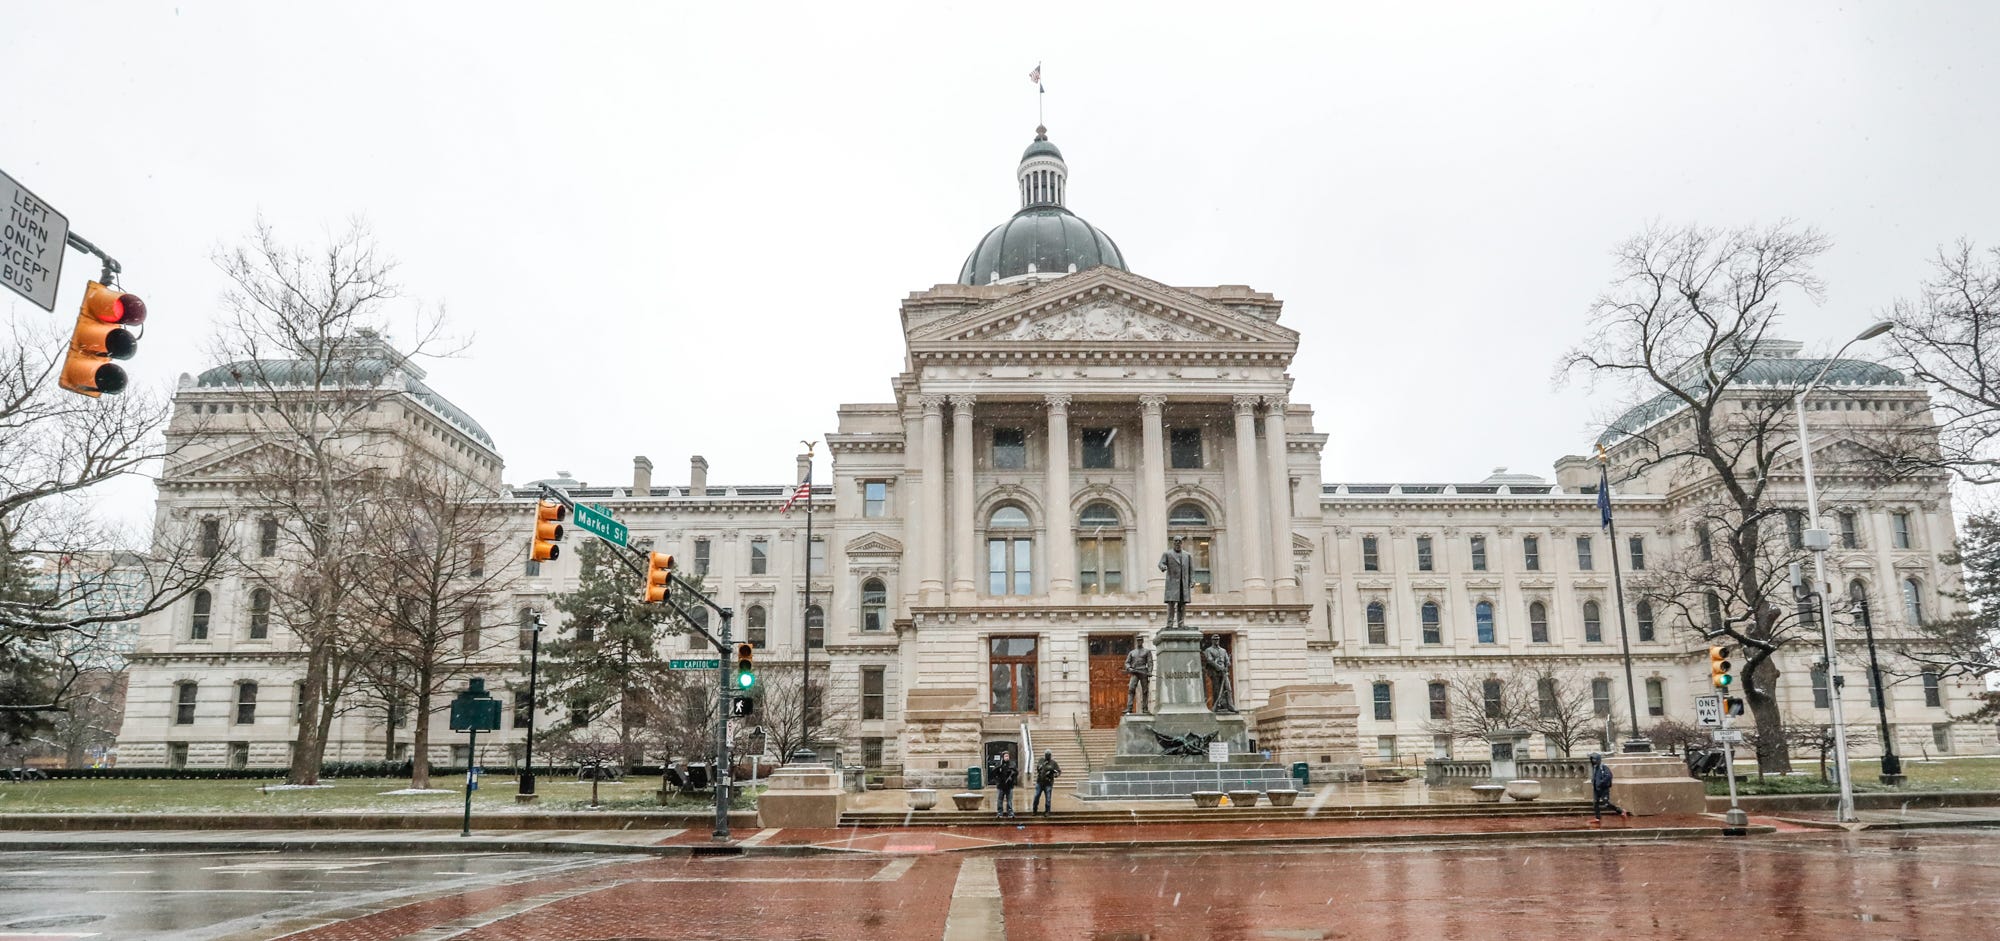 All was quiet at the Indiana State House in Indianapolis on Sunday, Jan. 17, 2021, on the day pro-Trump protests were expected to take place across the nation.